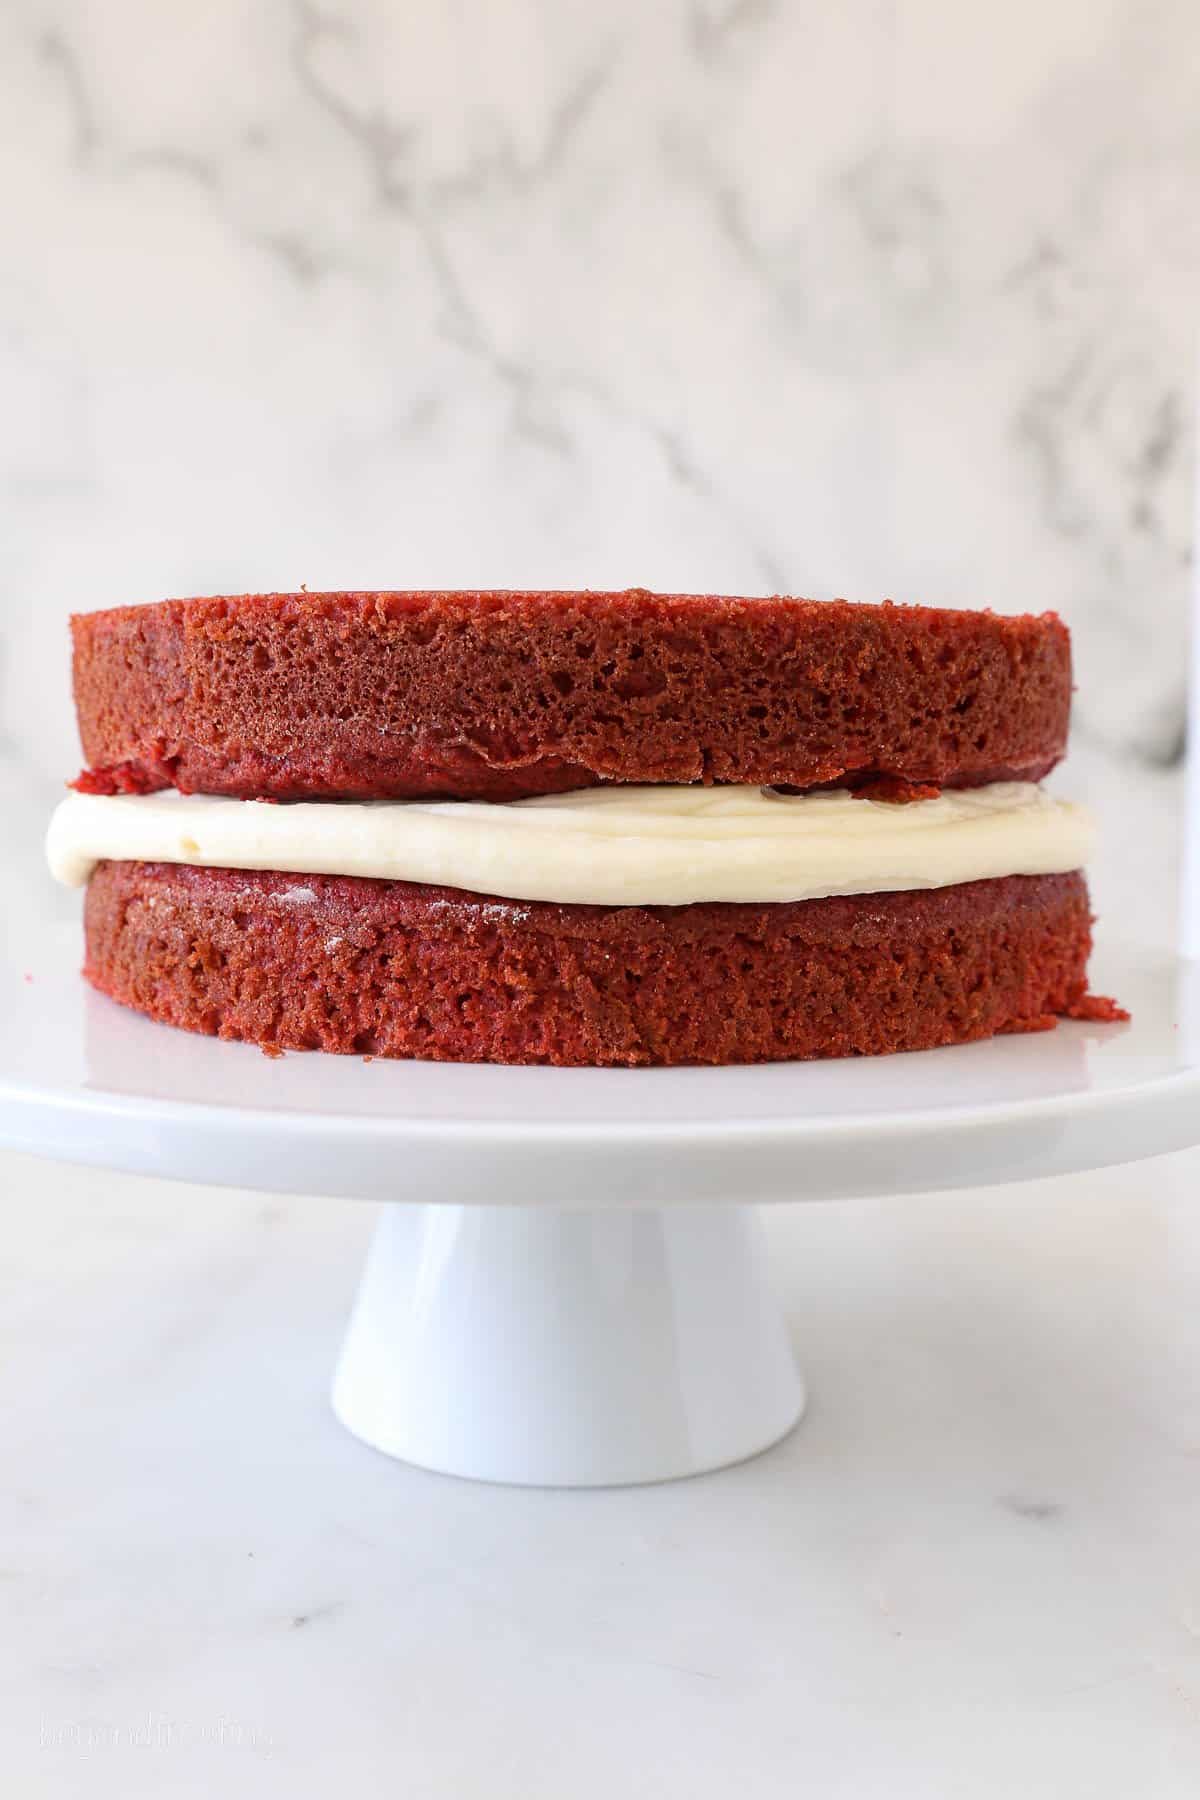 Two layers of red velvet cake with cream cheese frosting